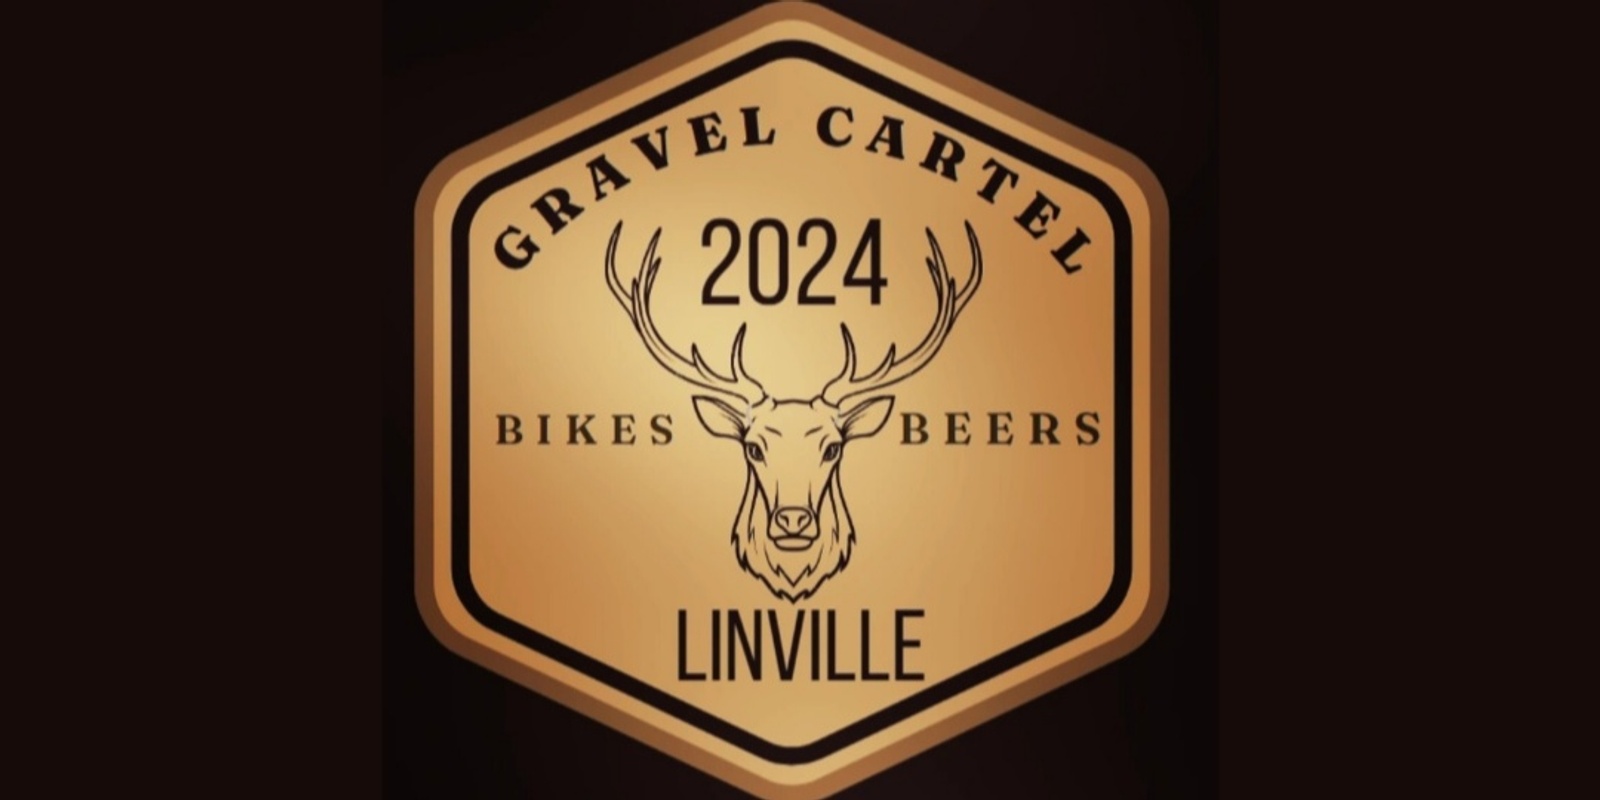 Banner image for Linville Bikes and Beers